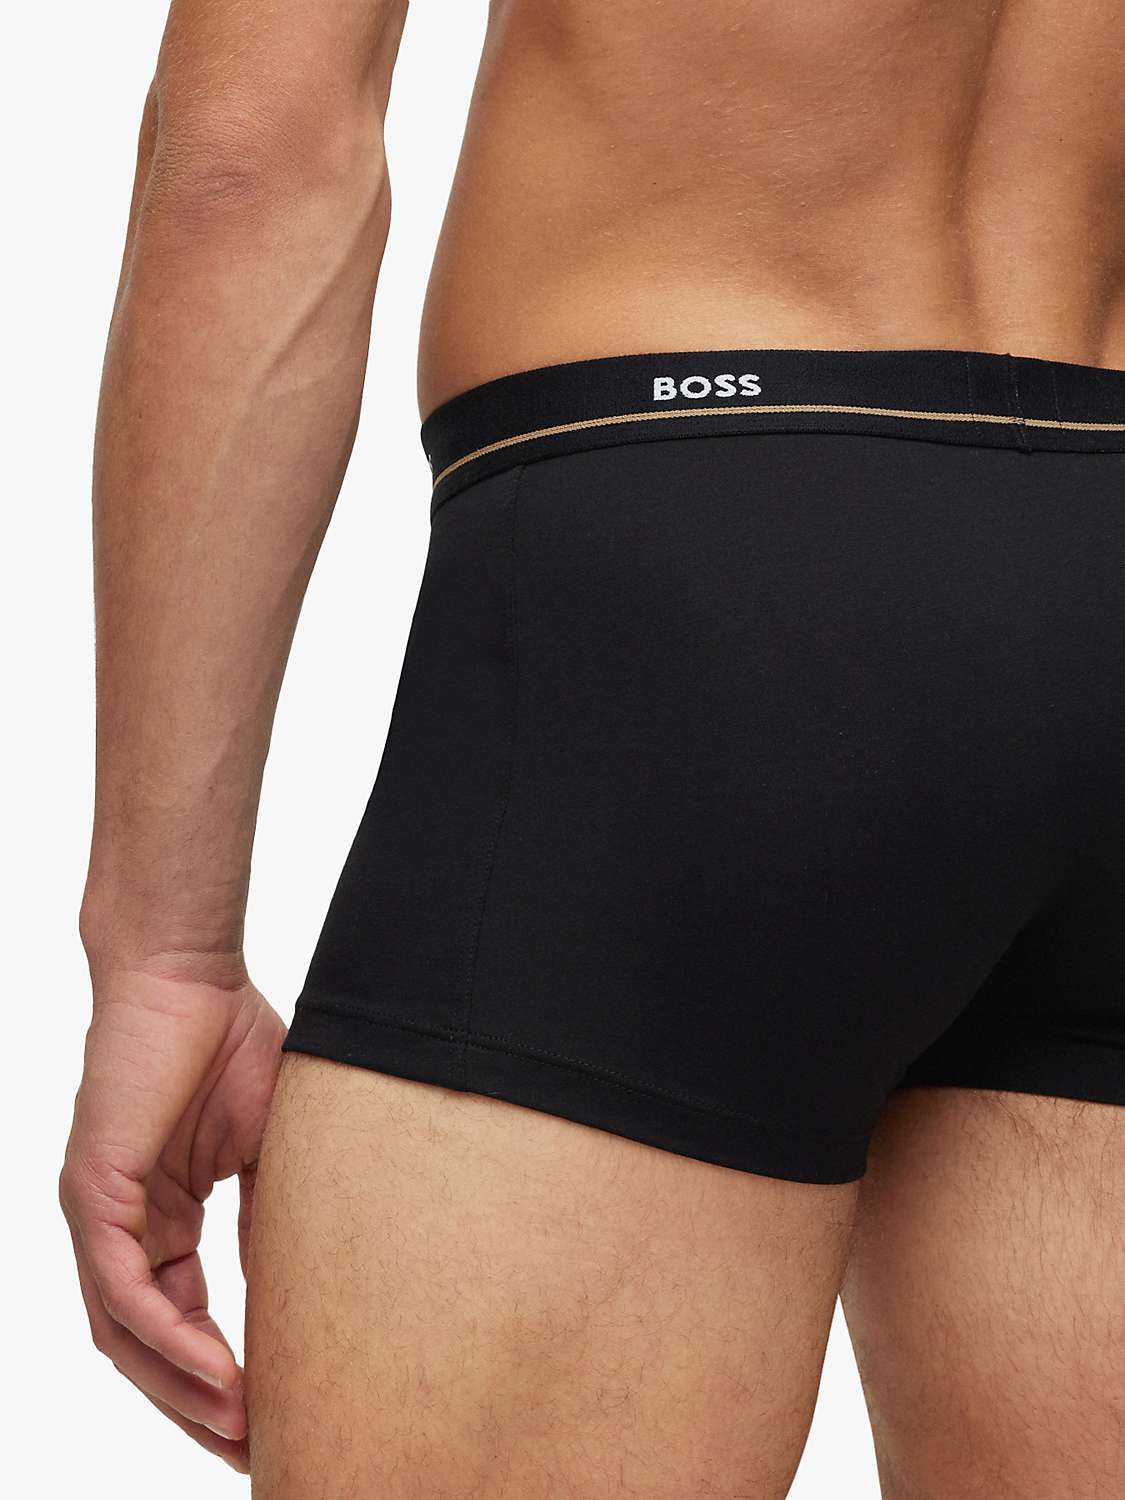 Buy BOSS Essential Cotton Logo Waistband Trunks, Pack of 5 Online at johnlewis.com